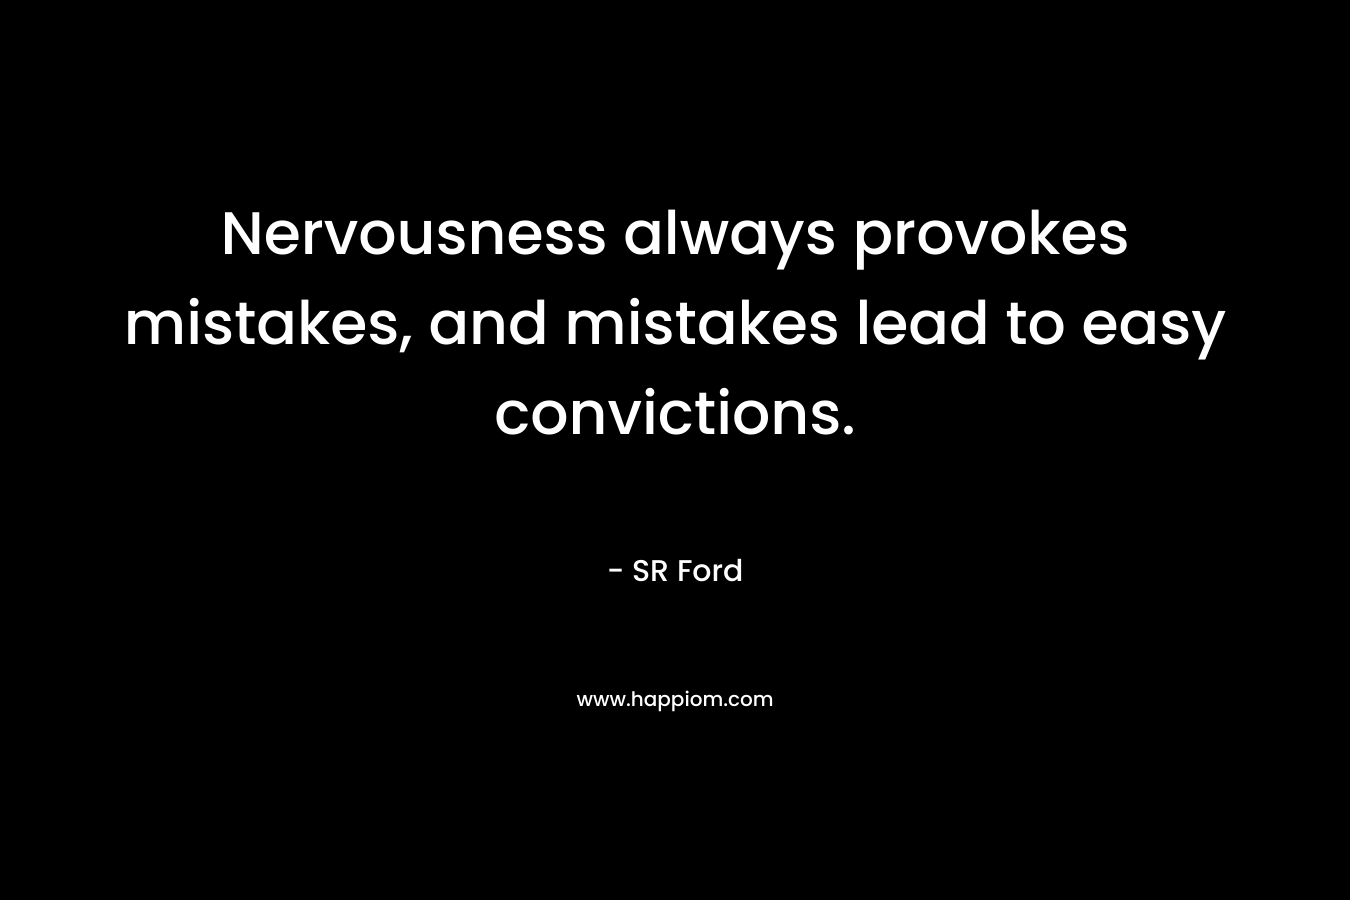 Nervousness always provokes mistakes, and mistakes lead to easy convictions. – SR Ford